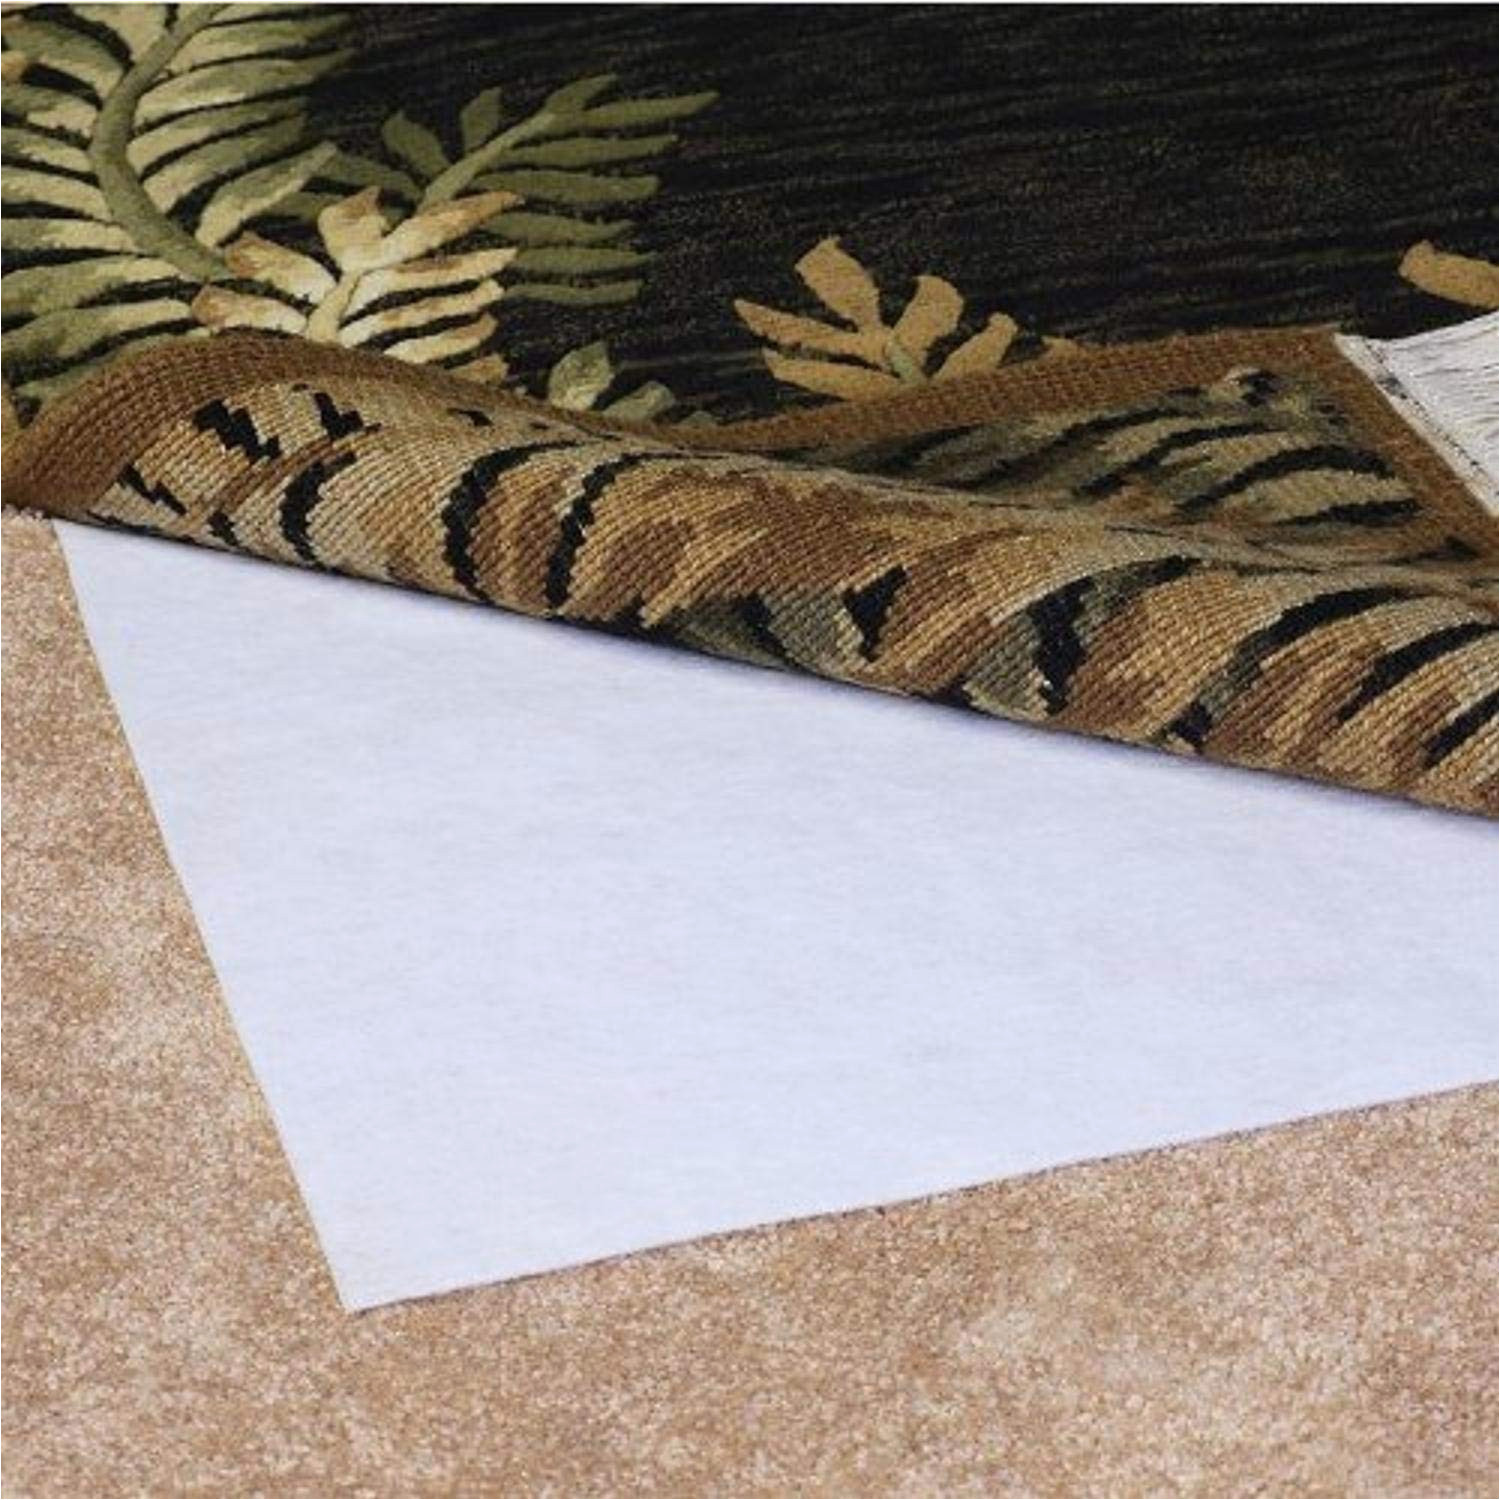 Stop area Rug From Sliding On Carpet Amazon.com: Grip-it Magic Stop Non-slip Indoor Rug Pad for Rugs …